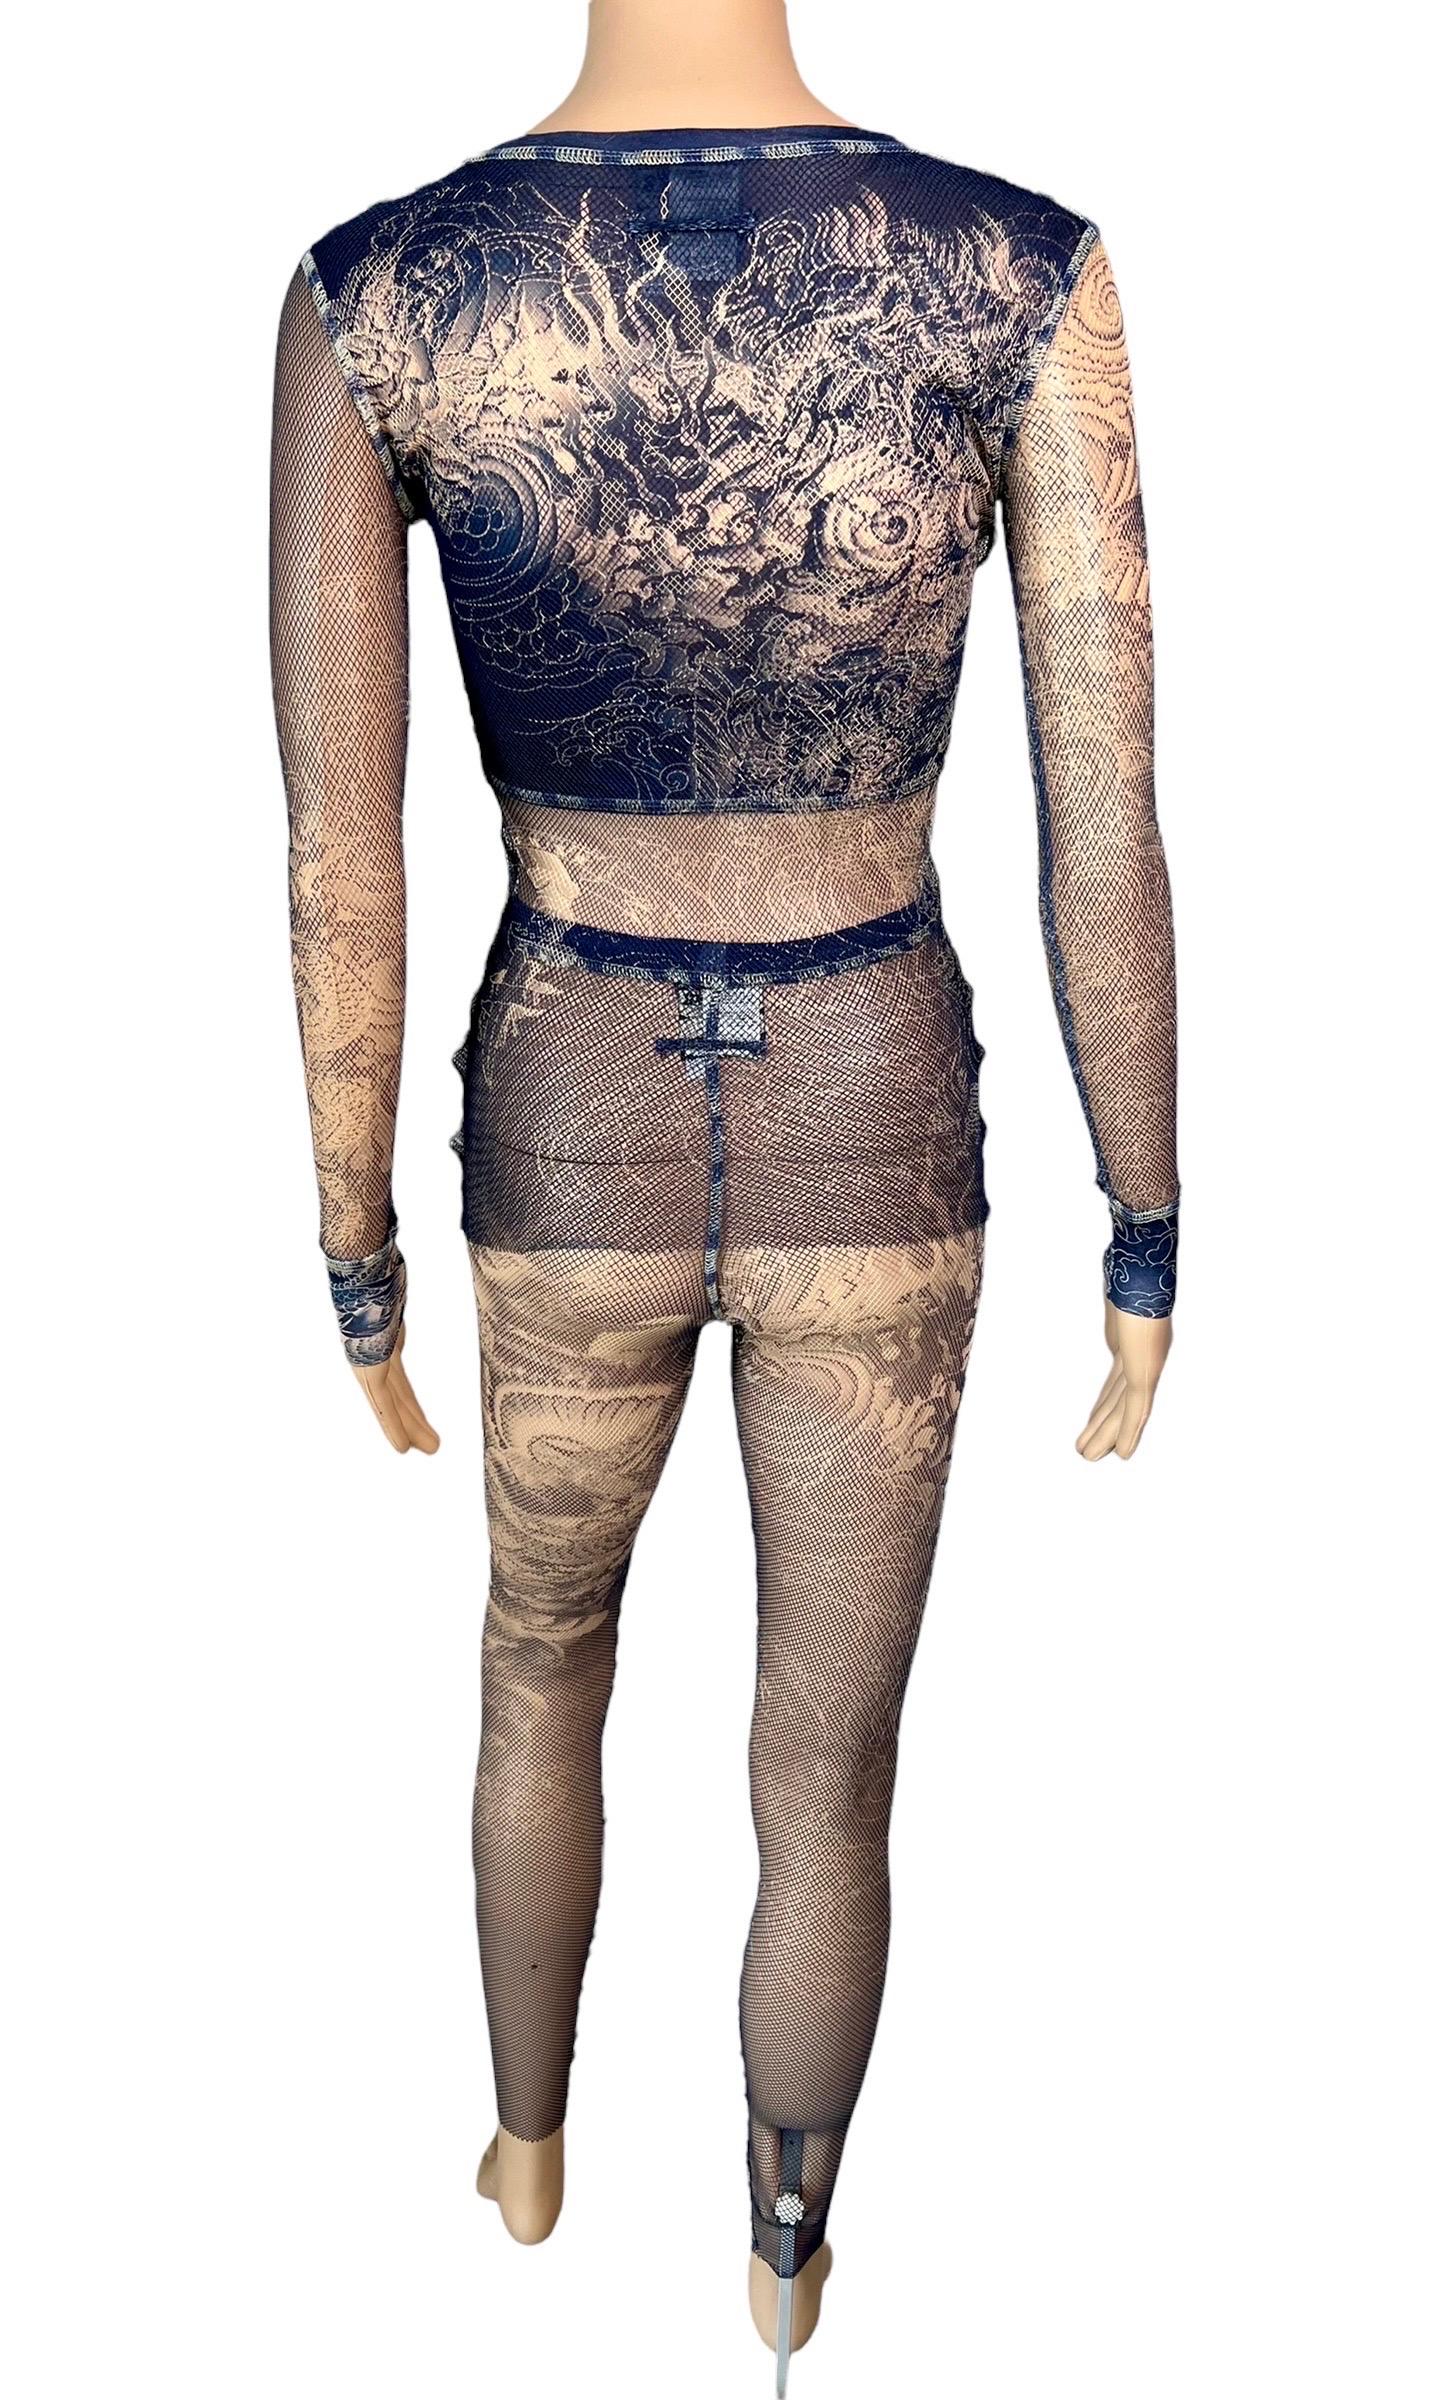 Jean Paul Gaultier Tattoo Sheer Fishnet Mesh Top & Leggings Pants 2 Piece Set In Excellent Condition For Sale In Naples, FL